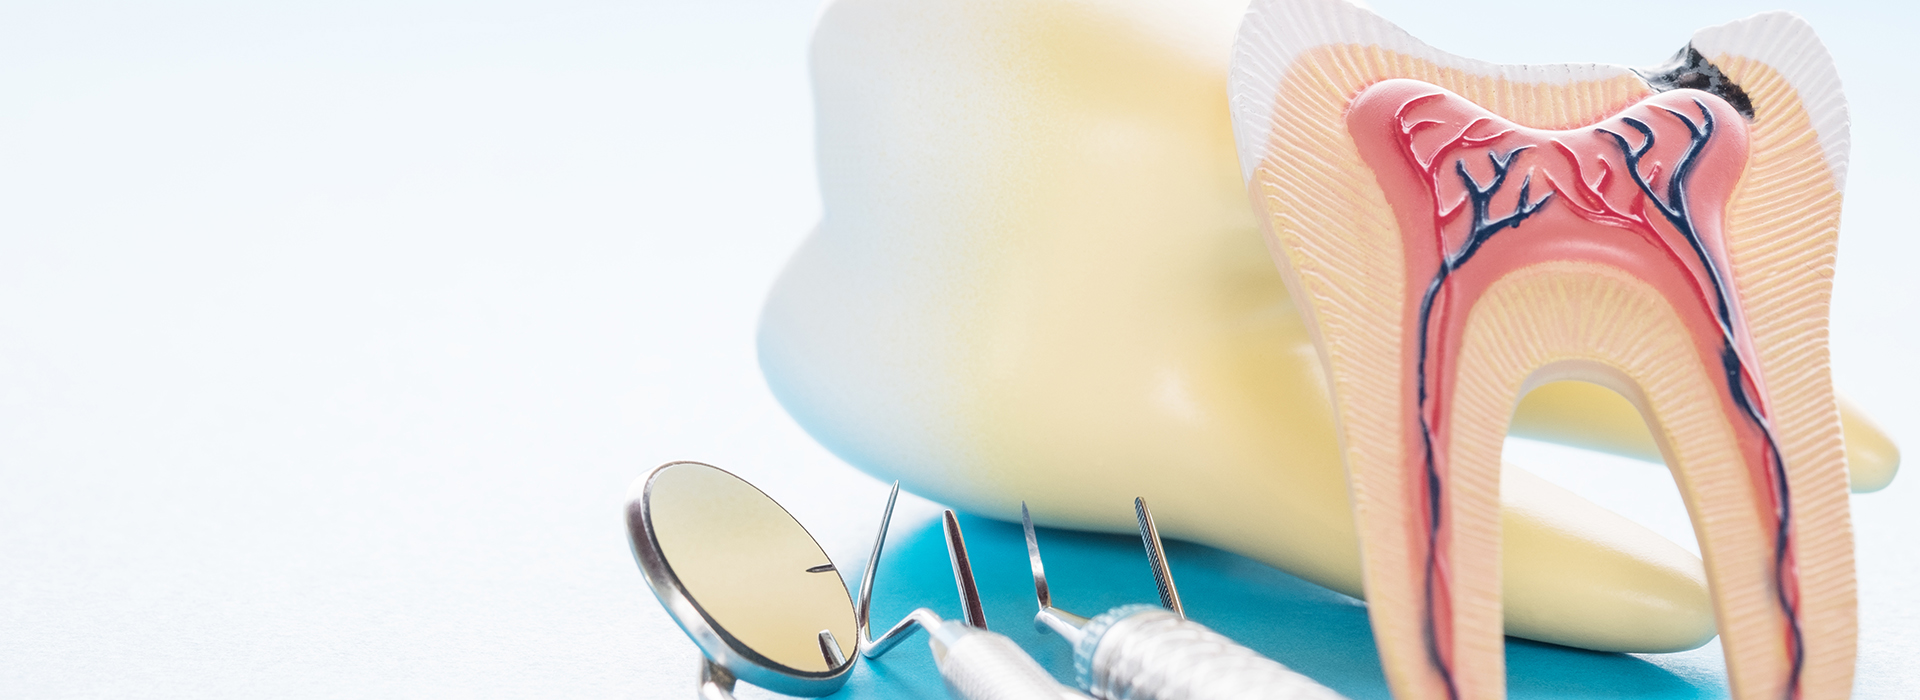 Steven R. Feigelson, DDS | Teeth Whitening, CAD CAM Technology and Gum Treatment